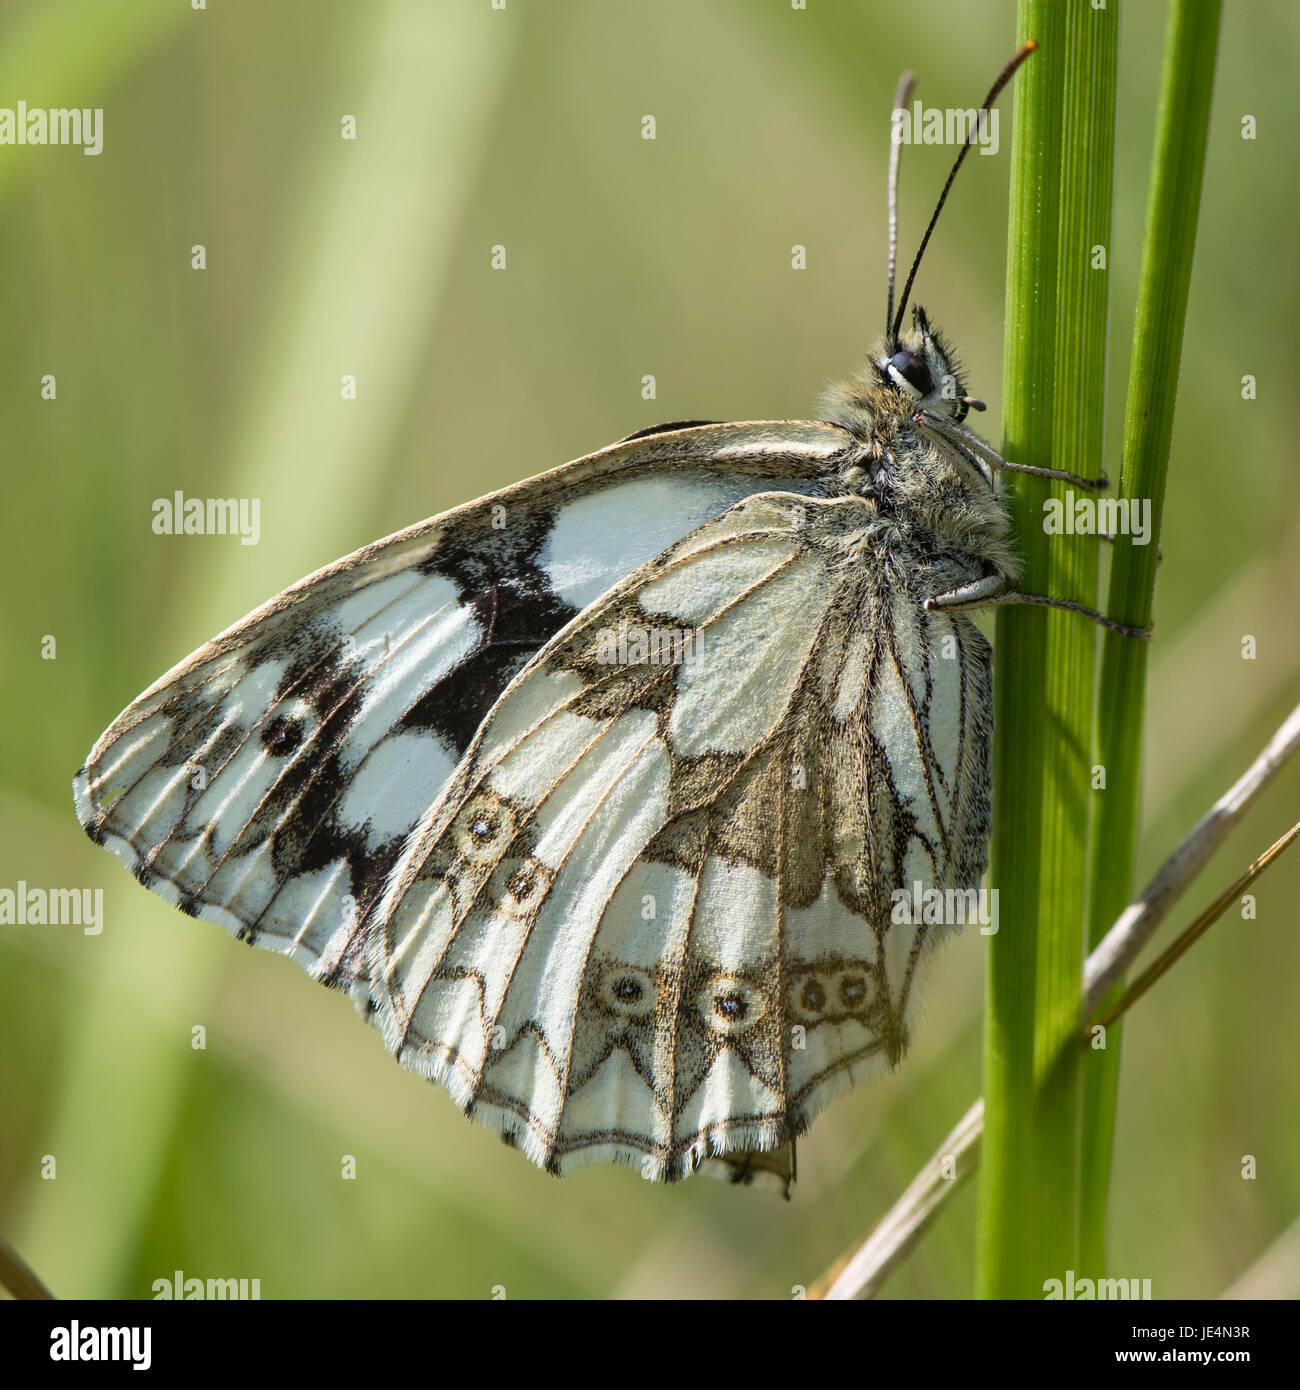 Marbled white butterfly (Melanargia galathea) on grass. Underside of black and white chequered butterfly in the family Nymphalidae, at rest on grass Stock Photo